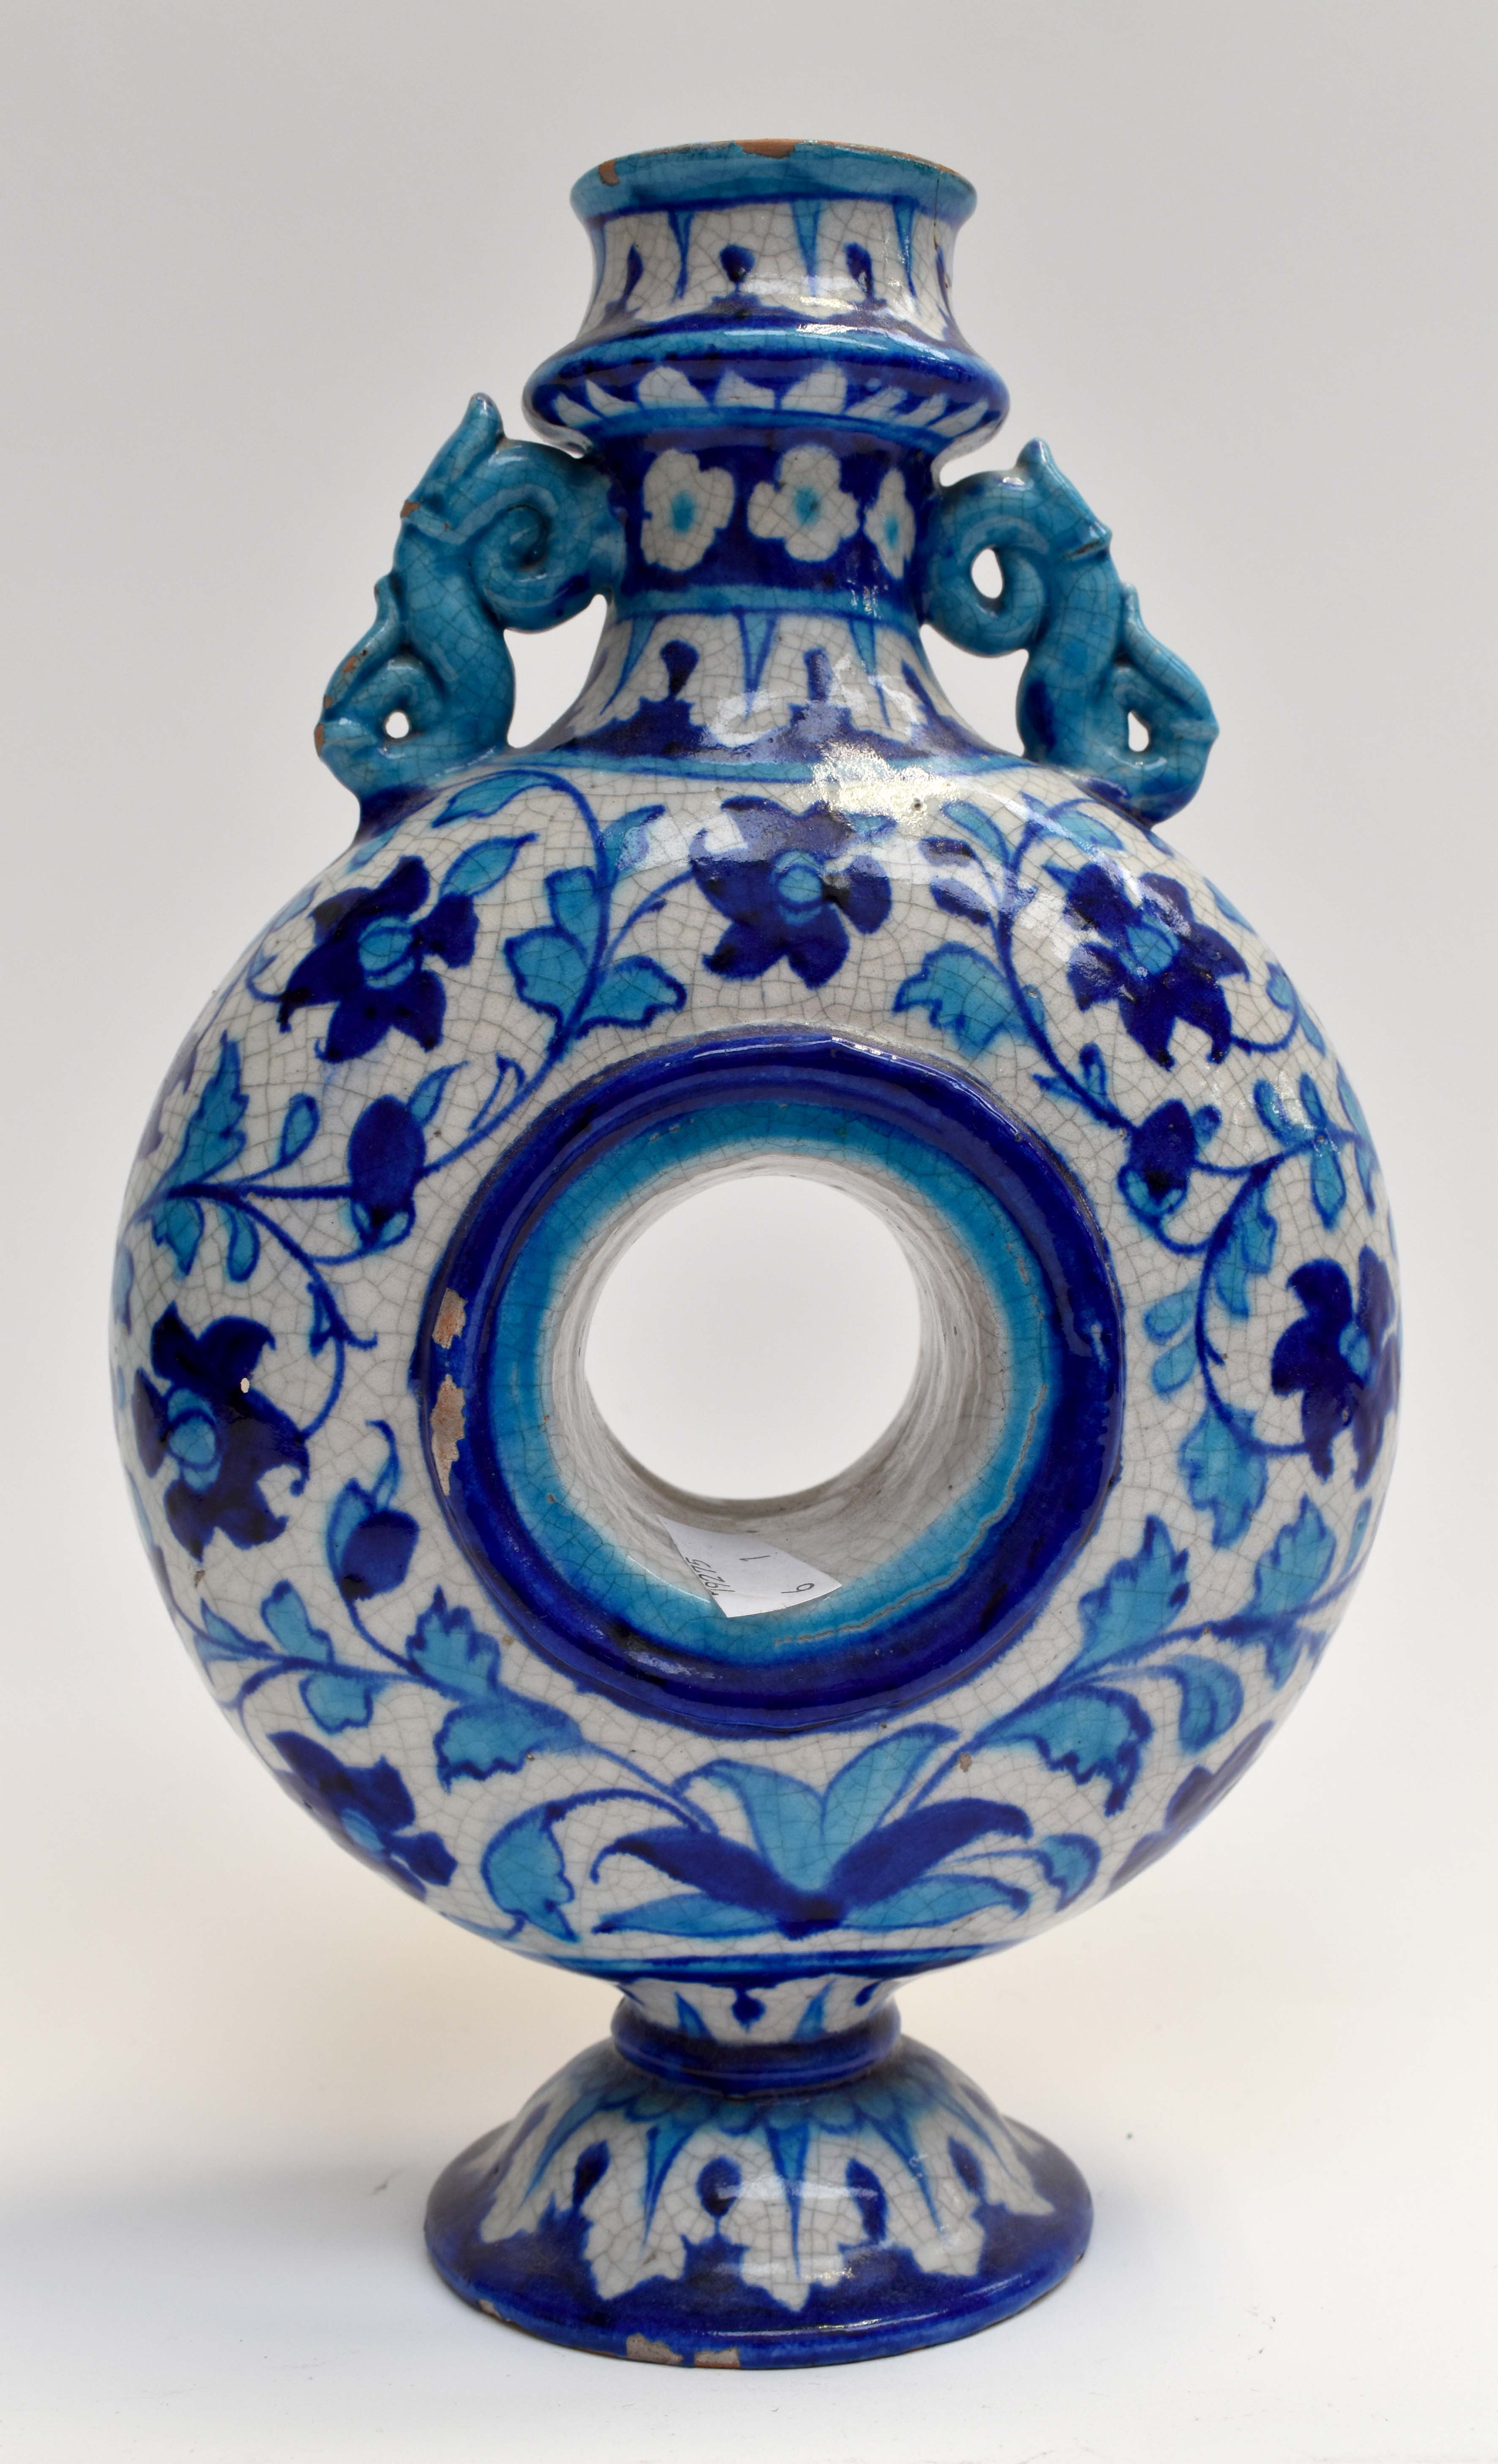 19th Century Islamic blue and turquoise vase with hole through the centre - Image 3 of 4